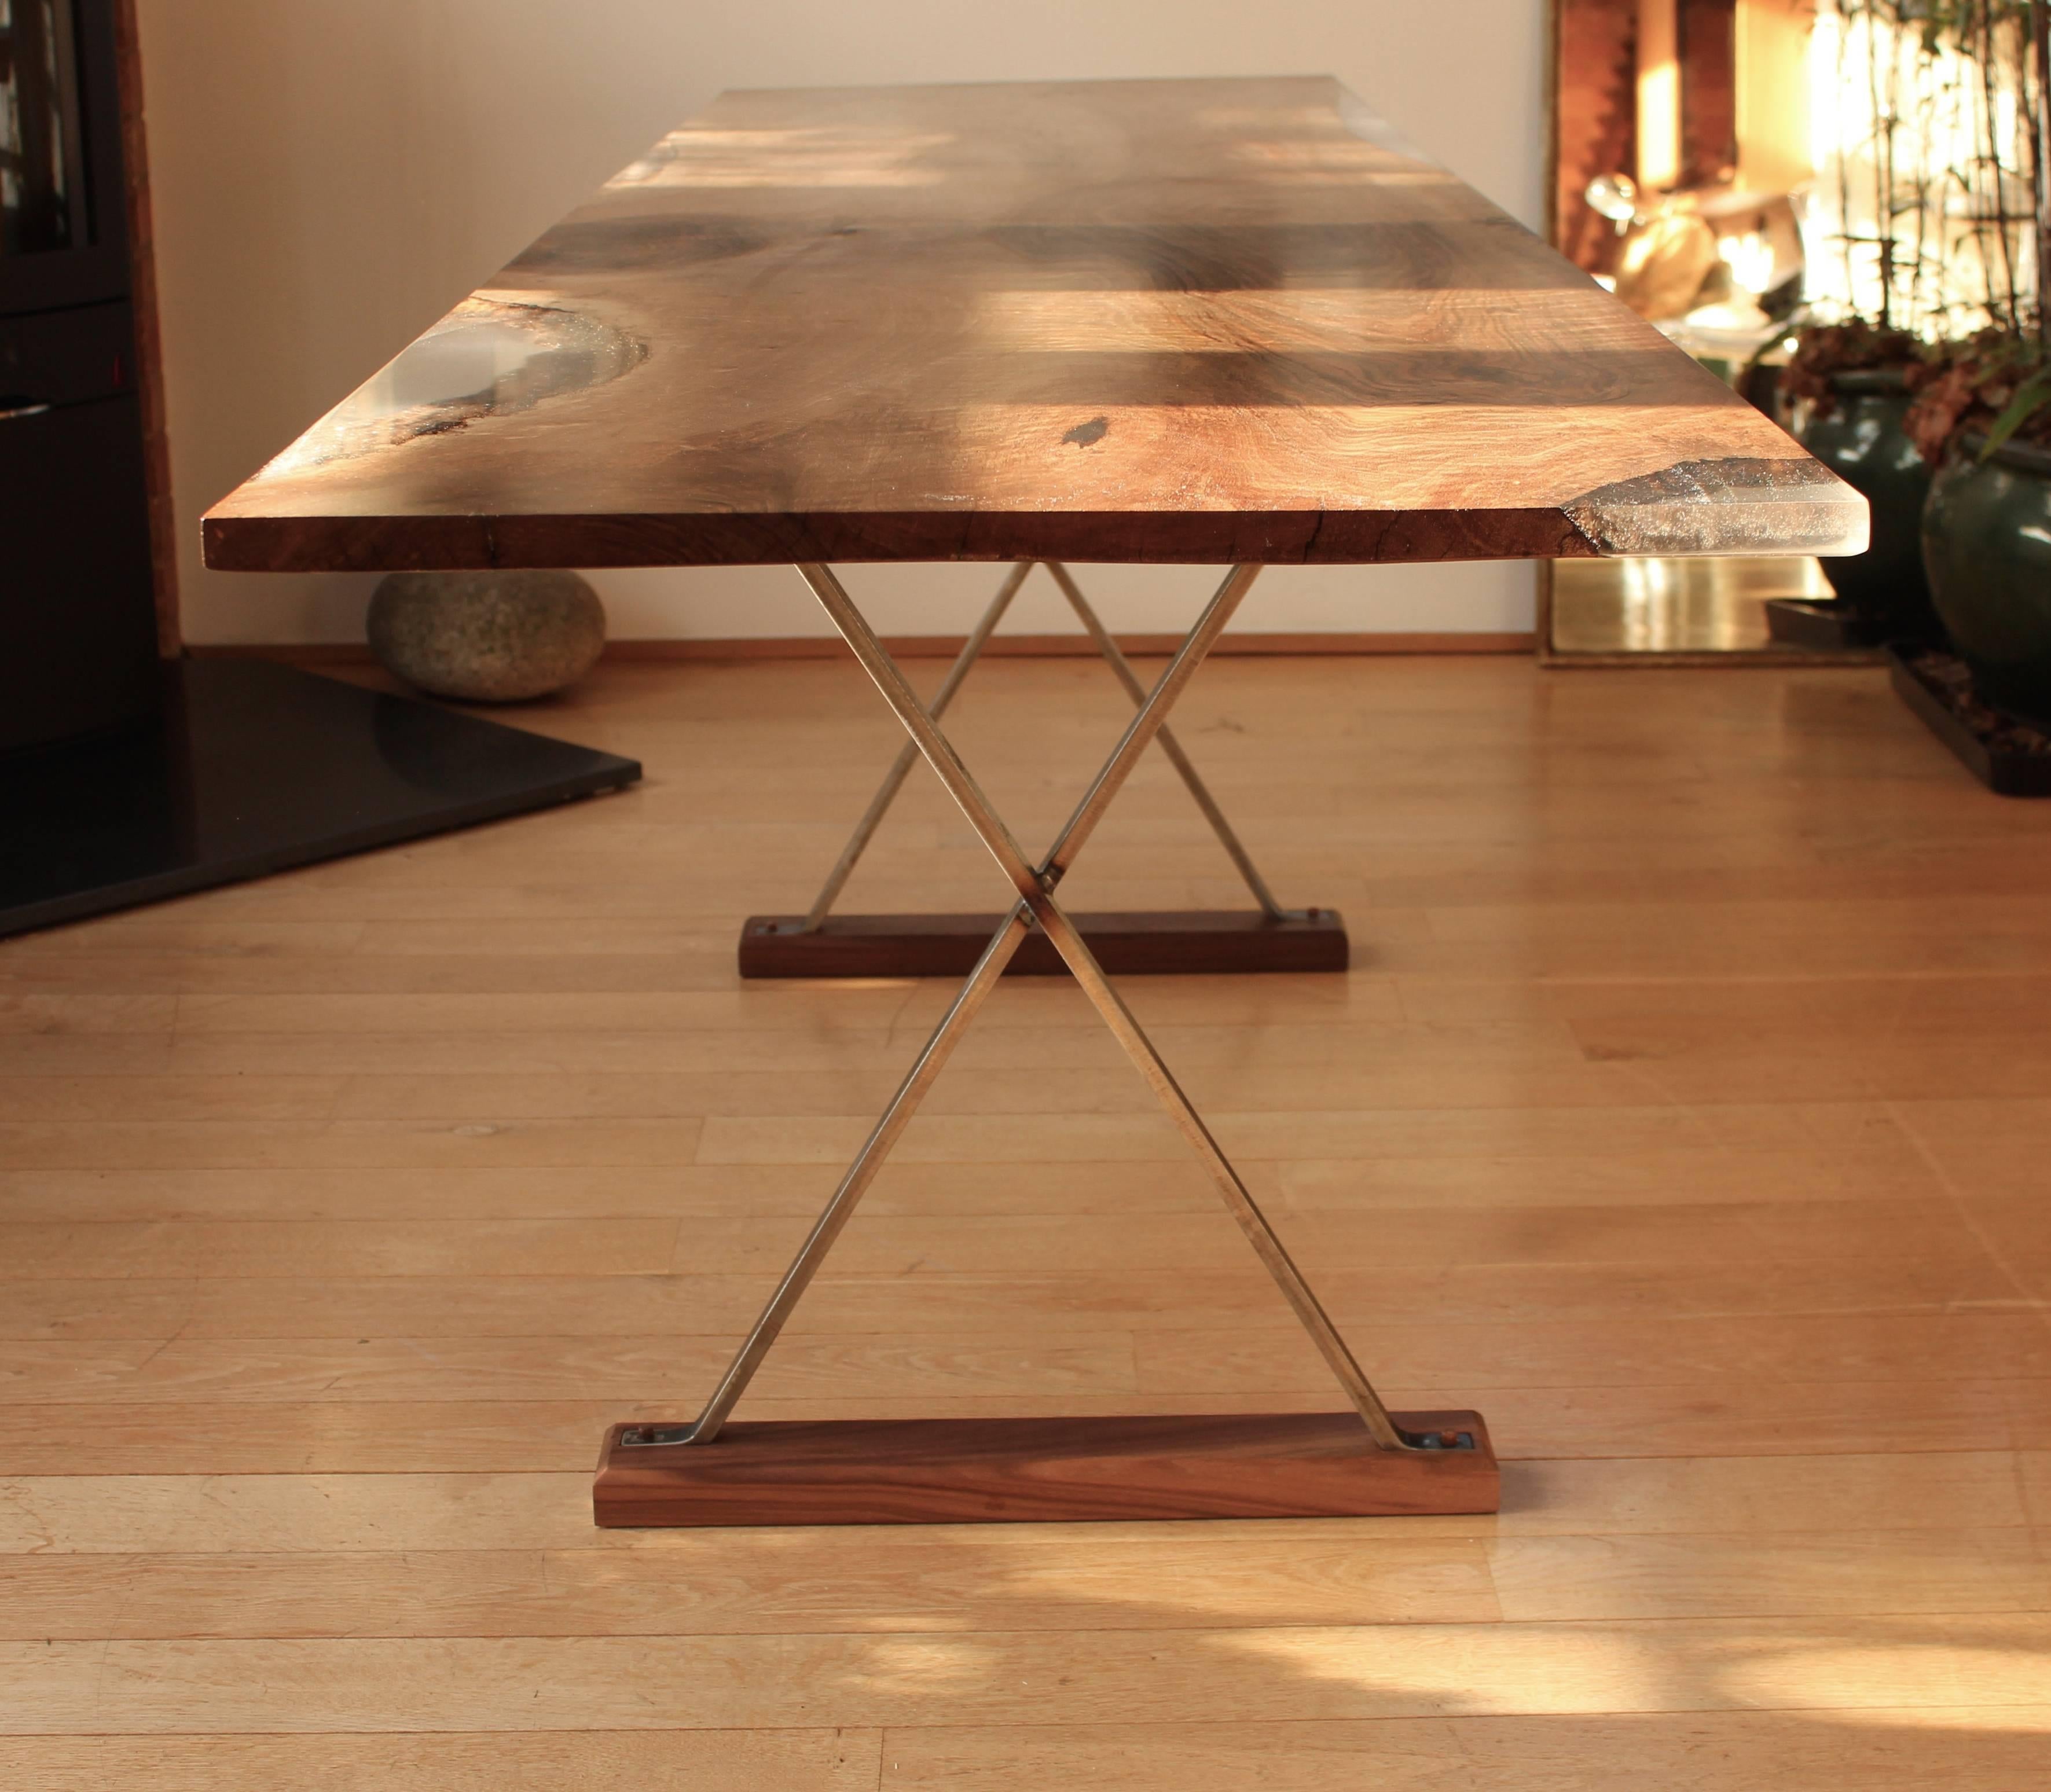 Ripple English walnut table with cross legs, the table is made from one piece of ripple English walnut with clear resin edge detail.

The raw steel cross legs are left unfinished with a wax coating. Walnut pegs hold the steel legs to the base